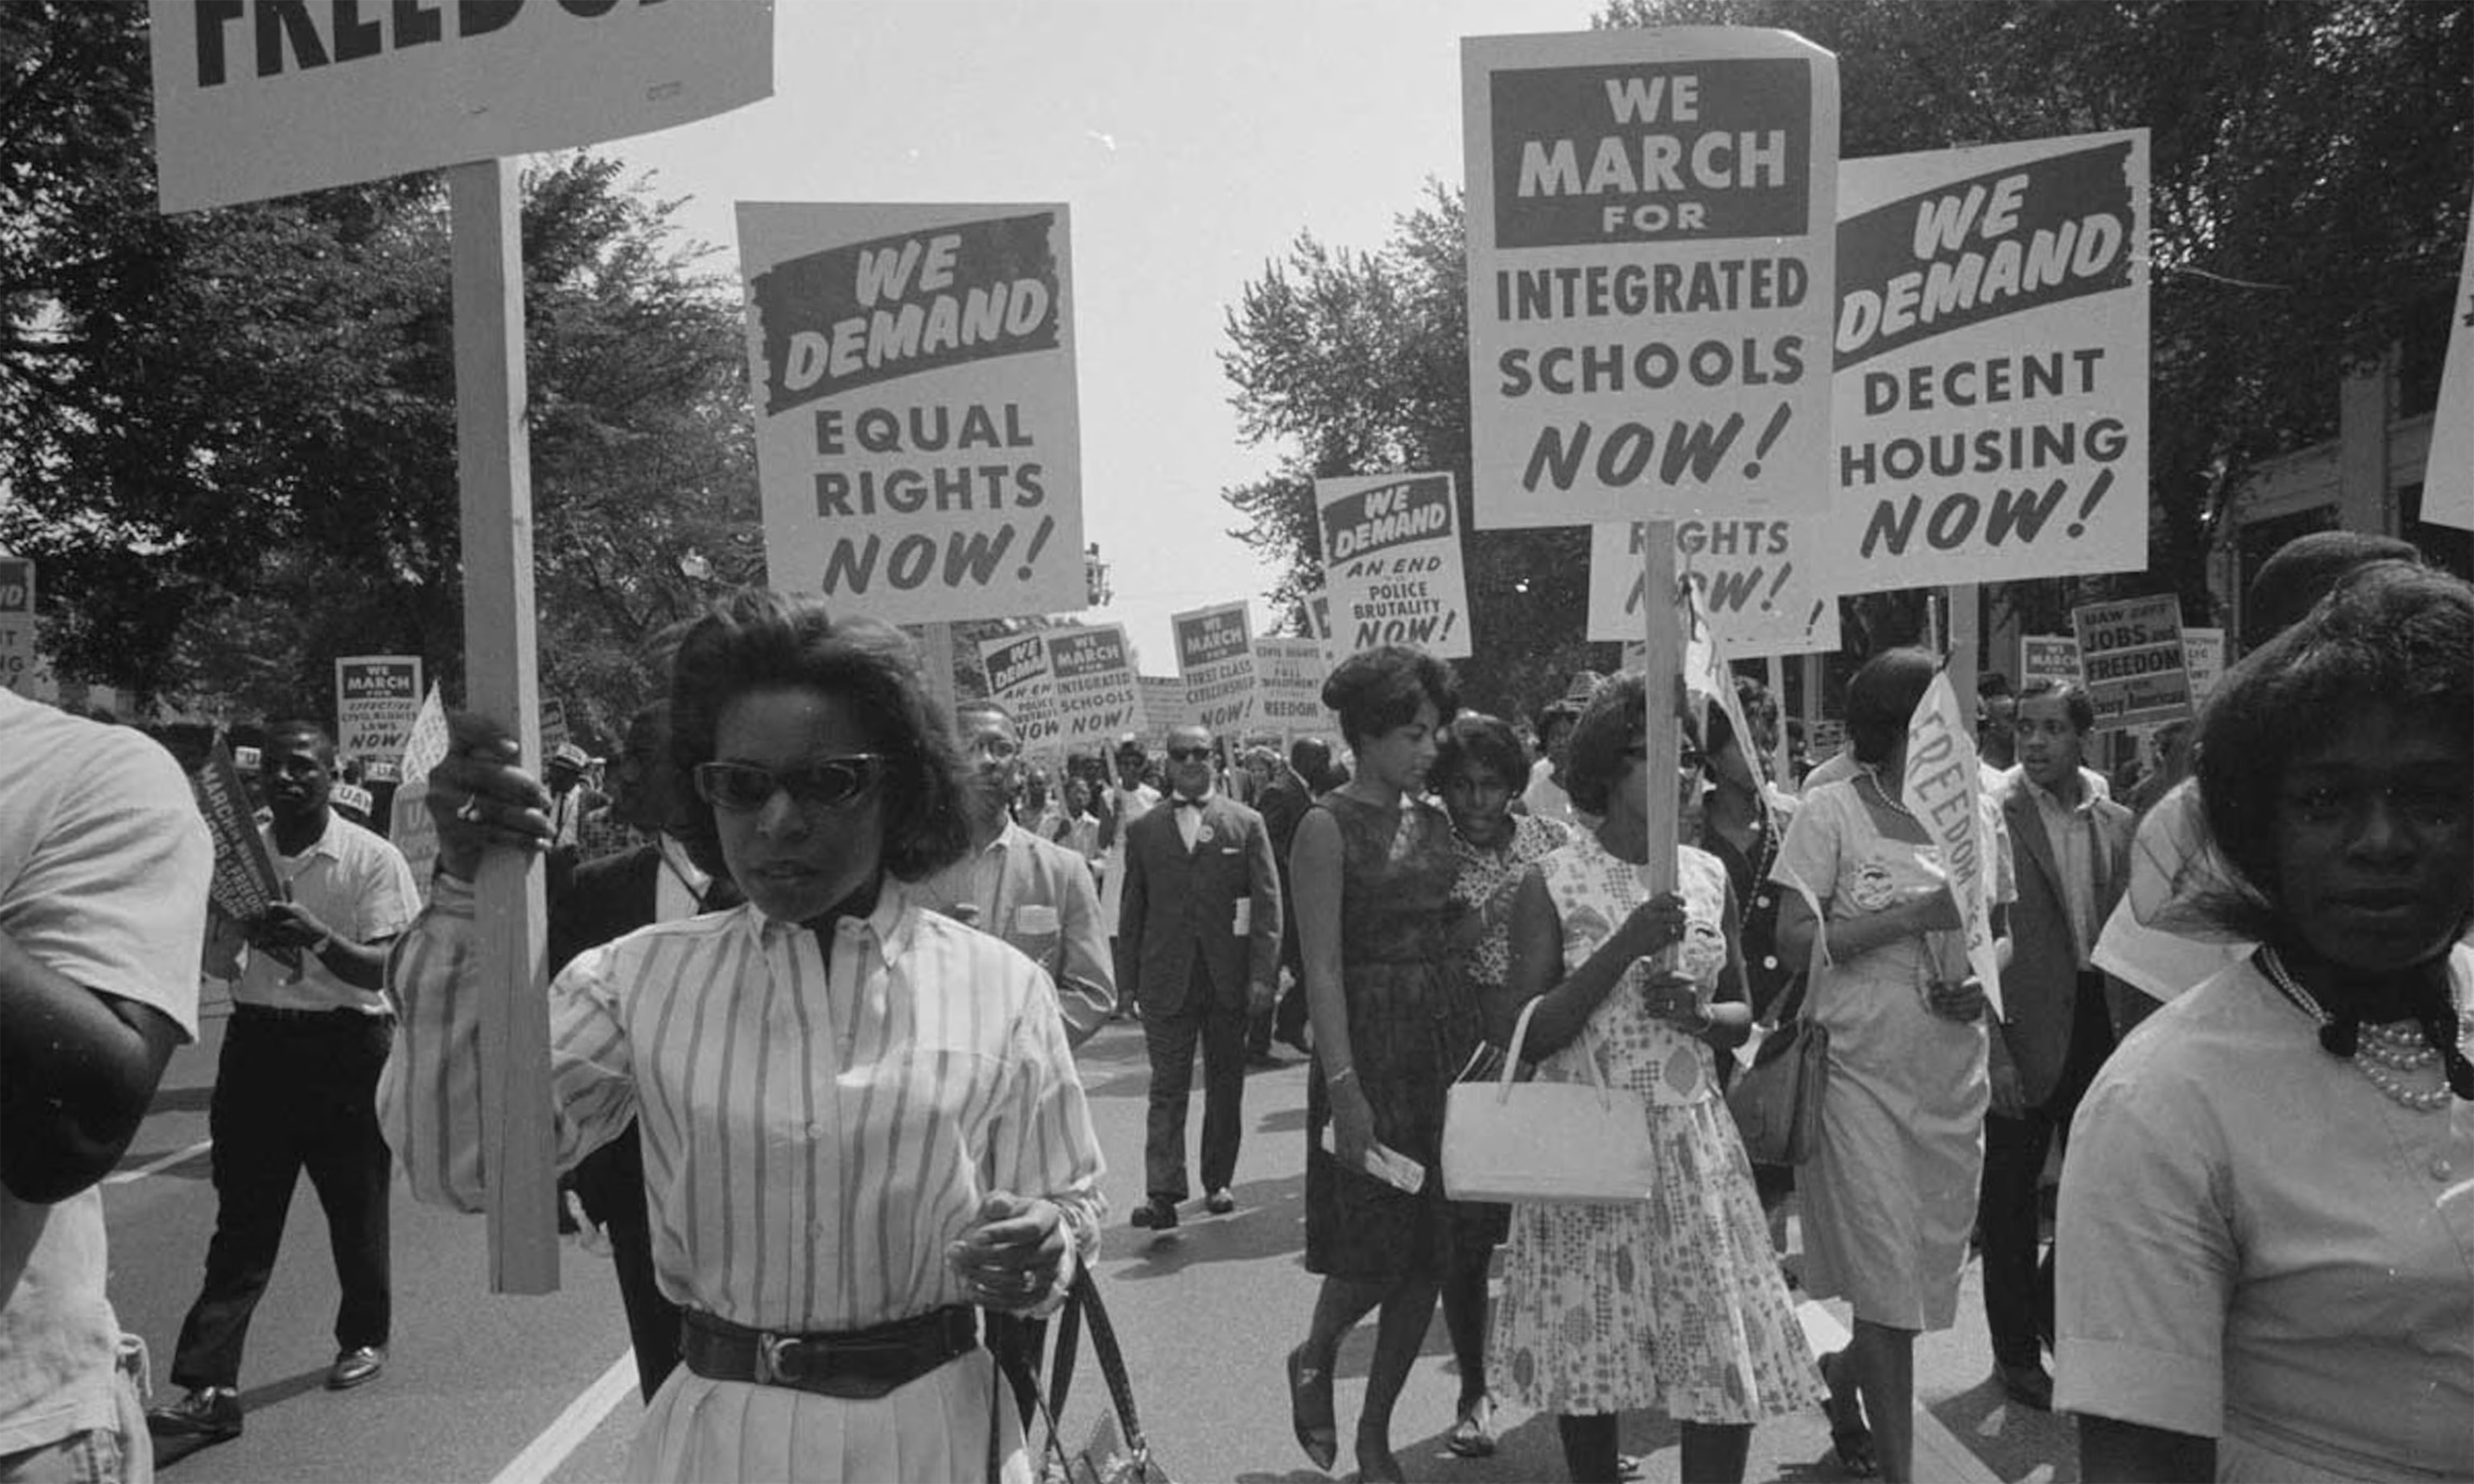 Black individuals marching for equal rights and integrated schools, an important moment in black history